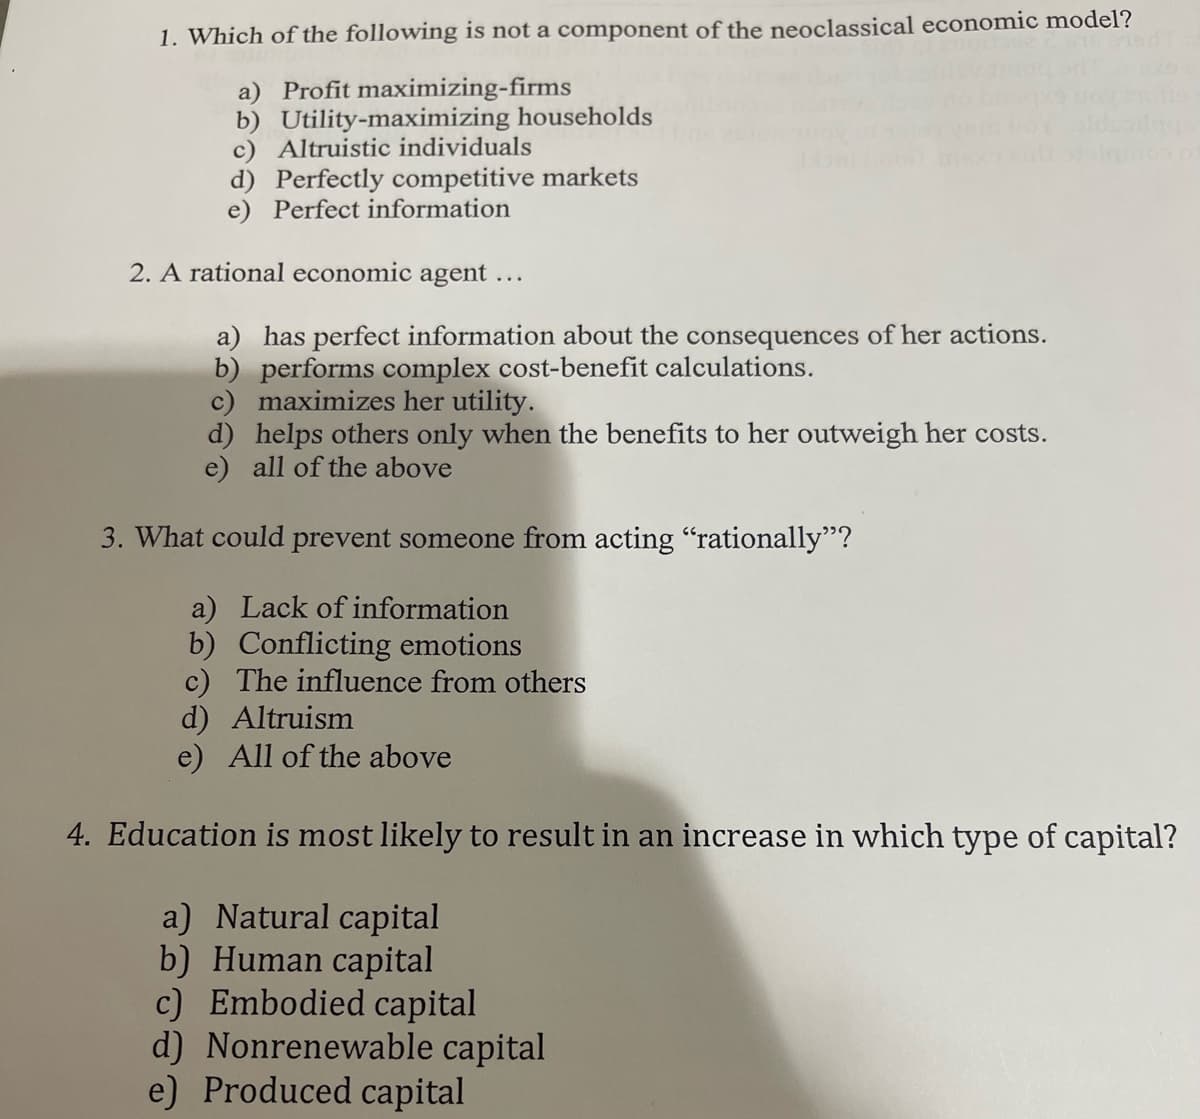 1. Which of the following is not a component of the neoclassical economic model?
a) Profit maximizing-firms
b) Utility-maximizing households
c) Altruistic individuals
d) Perfectly competitive markets
e) Perfect information
2. A rational economic agent ...
a) has perfect information about the consequences of her actions.
b) performs complex cost-benefit calculations.
c) maximizes her utility.
d) helps others only when the benefits to her outweigh her costs.
e) all of the above
3. What could prevent someone from acting "rationally"?
a) Lack of information
b) Conflicting emotions
c) The influence from others
d) Altruism
e) All of the above
4. Education is most likely to result in an increase in which type of capital?
a) Natural capital
b) Human capital
c) Embodied capital
d) Nonrenewable capital
e) Produced capital